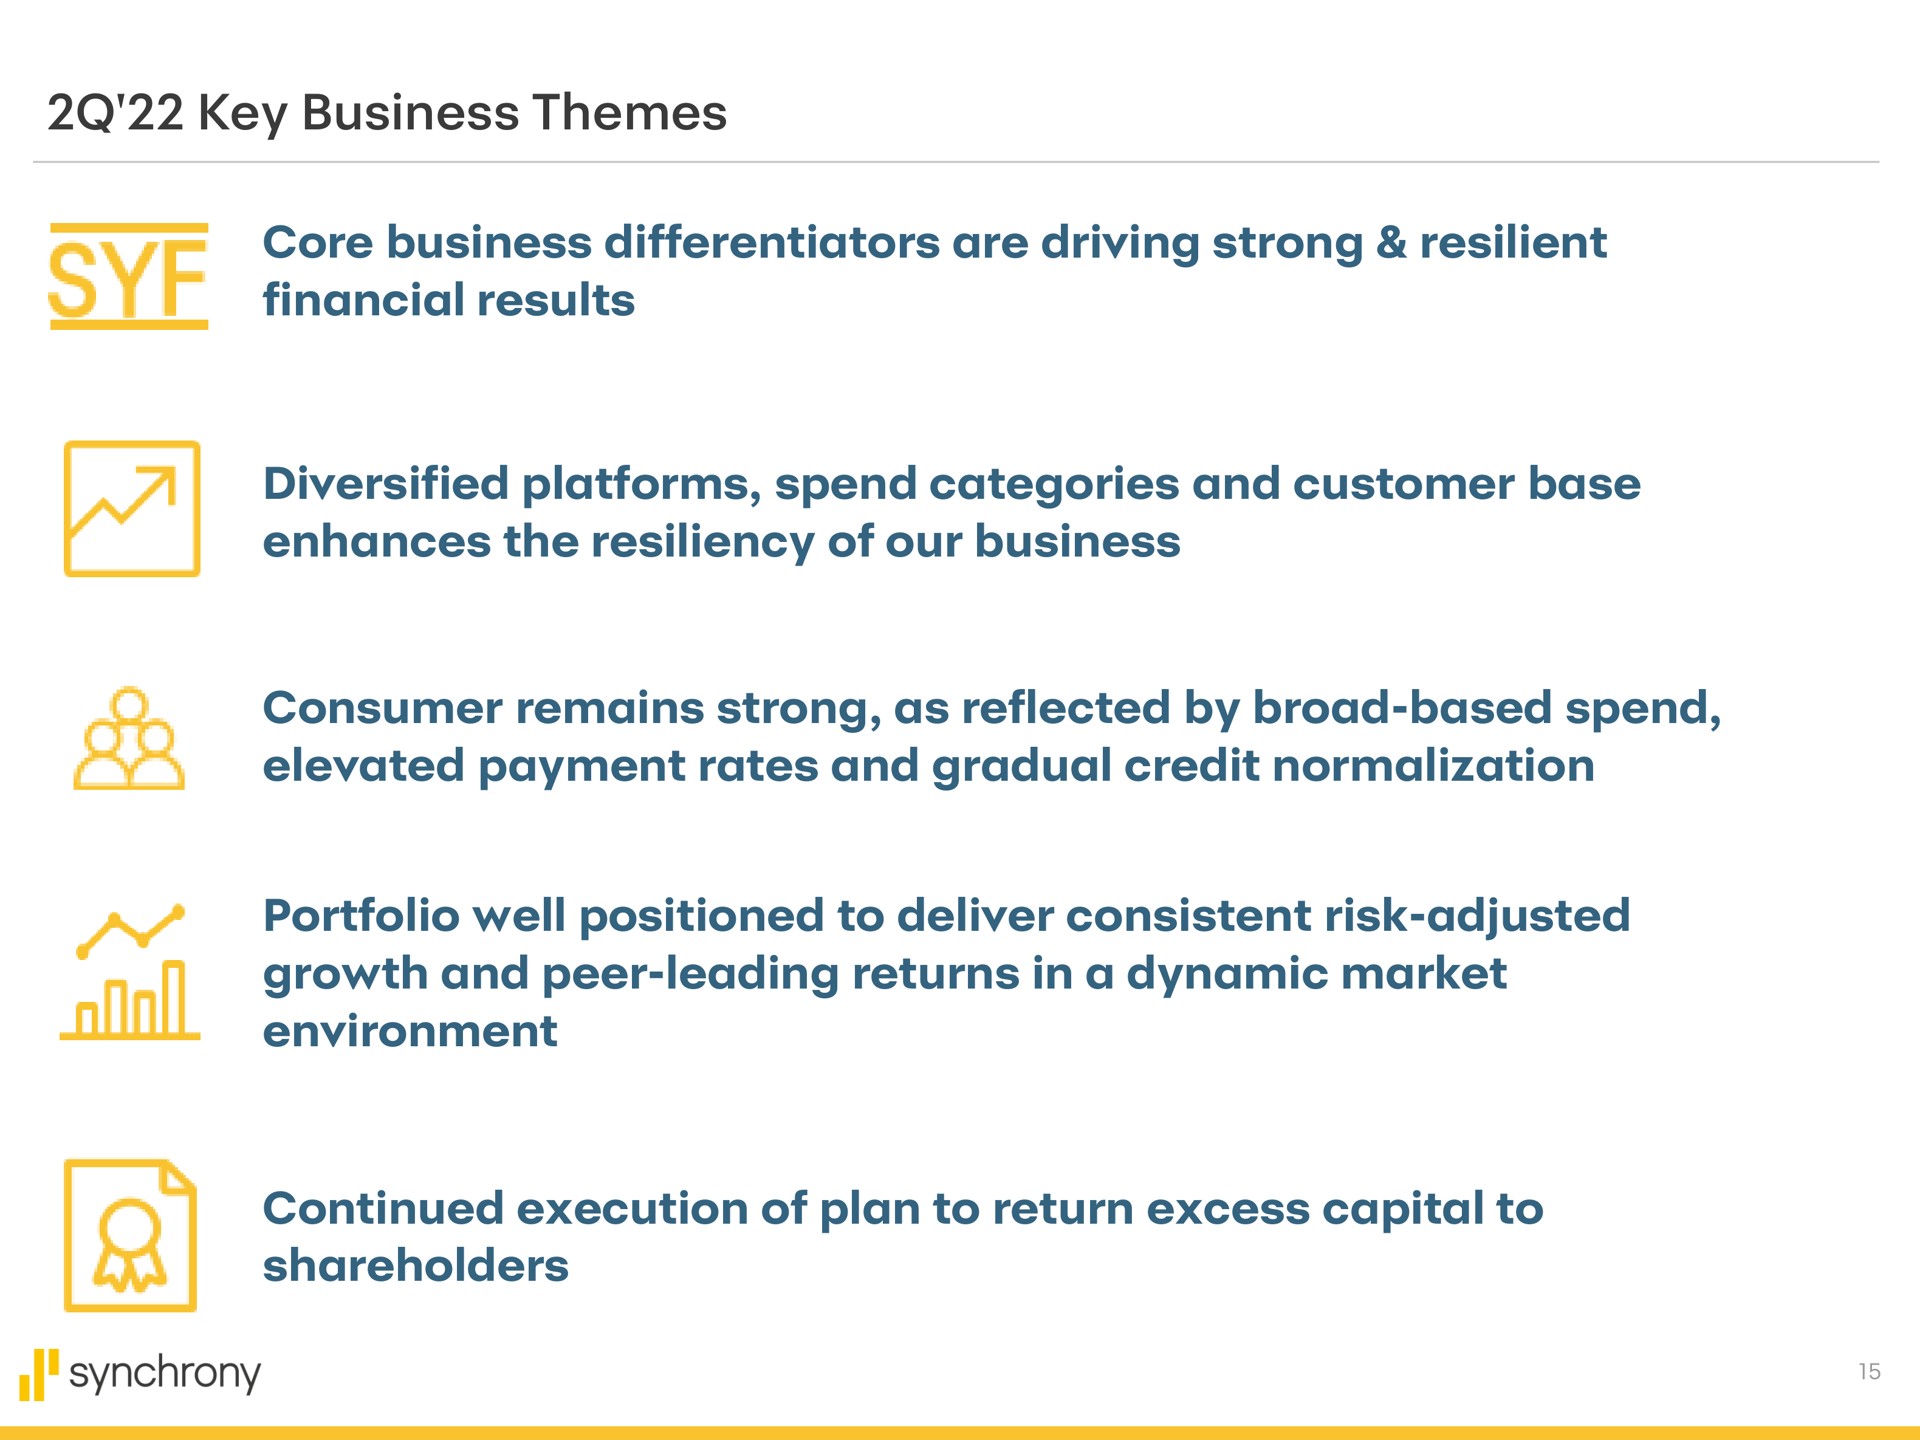 key business themes core business differentiators are driving strong resilient financial results diversified platforms spend categories and customer base enhances the resiliency of our business consumer remains strong as reflected by broad based spend elevated payment rates and gradual credit normalization portfolio well positioned to deliver consistent risk adjusted growth and peer leading returns in a dynamic market environment continued execution of plan to return excess capital to shareholders synchrony is | Synchrony Financial